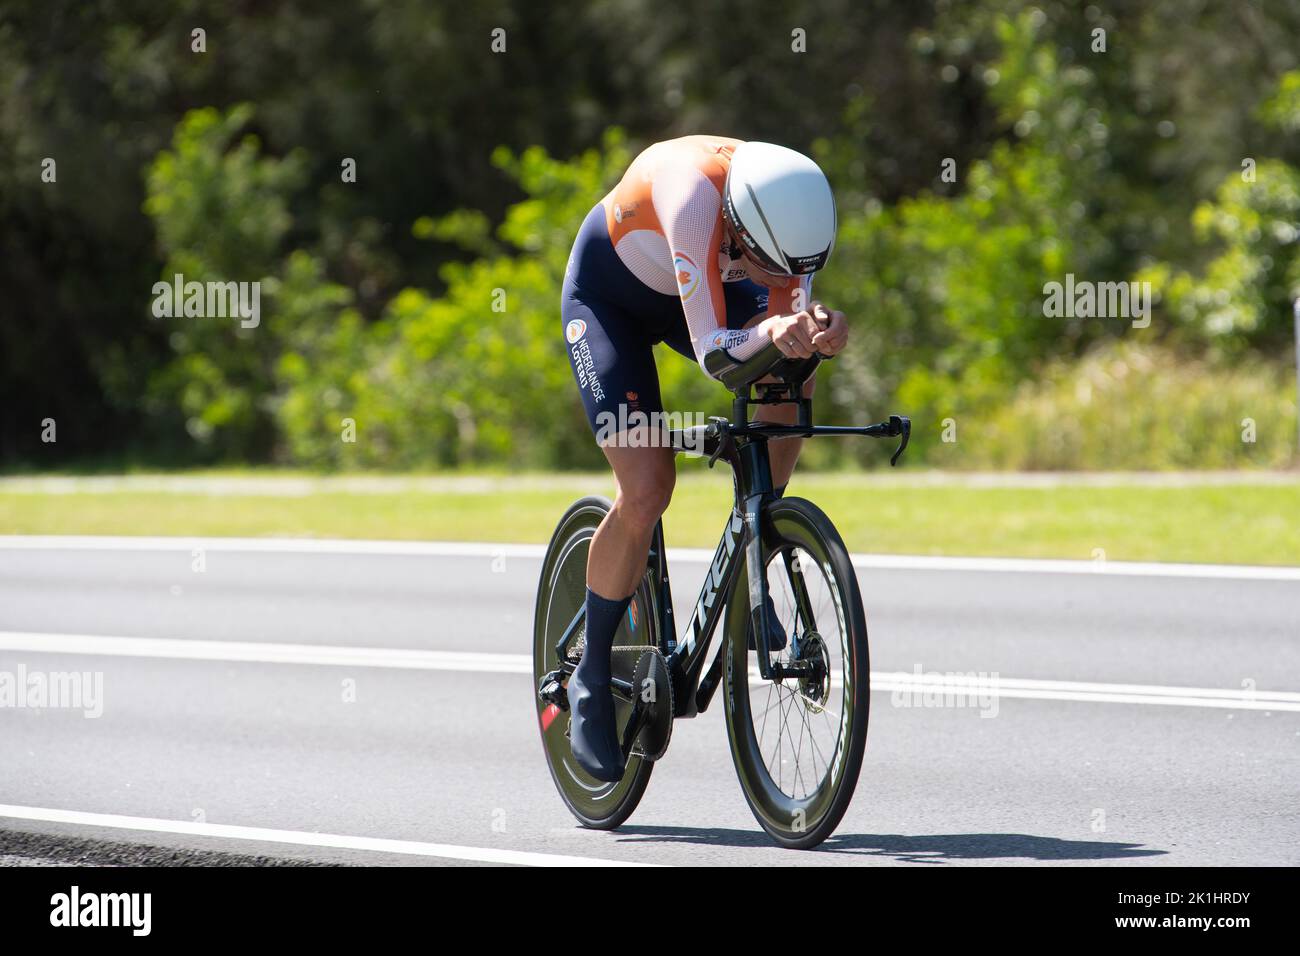 Ellen van Dijk of the Netherlands, winning the Women's elite Time Trial at the 2022 UCI Road Cycling World Championships. Stock Photo